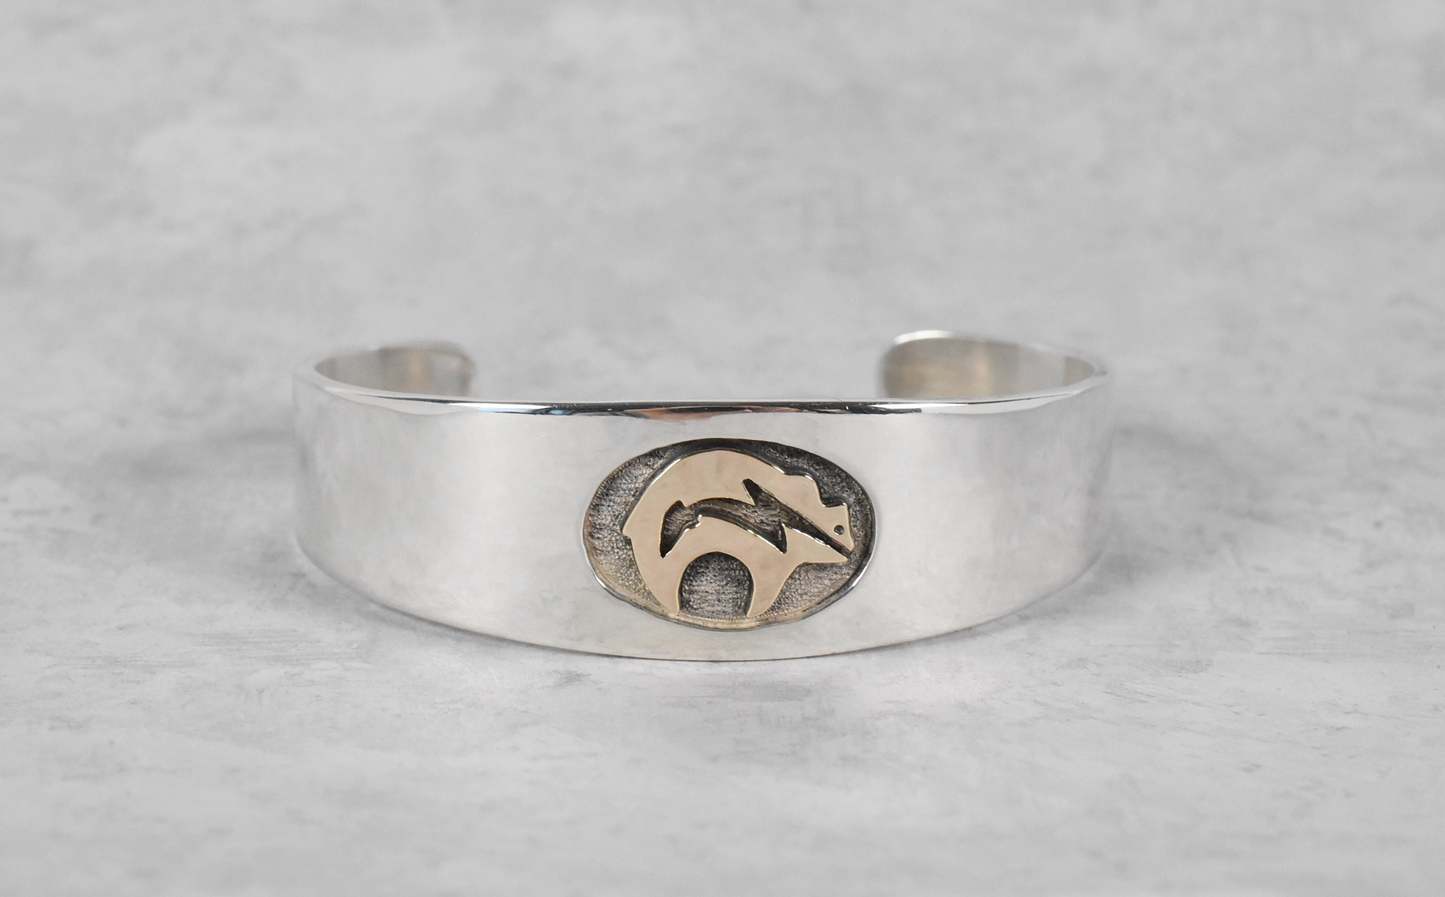 M Rogers Sterling Silver & 14k Gold Bear Cuff Bracelet, 7 inches - 35.6g